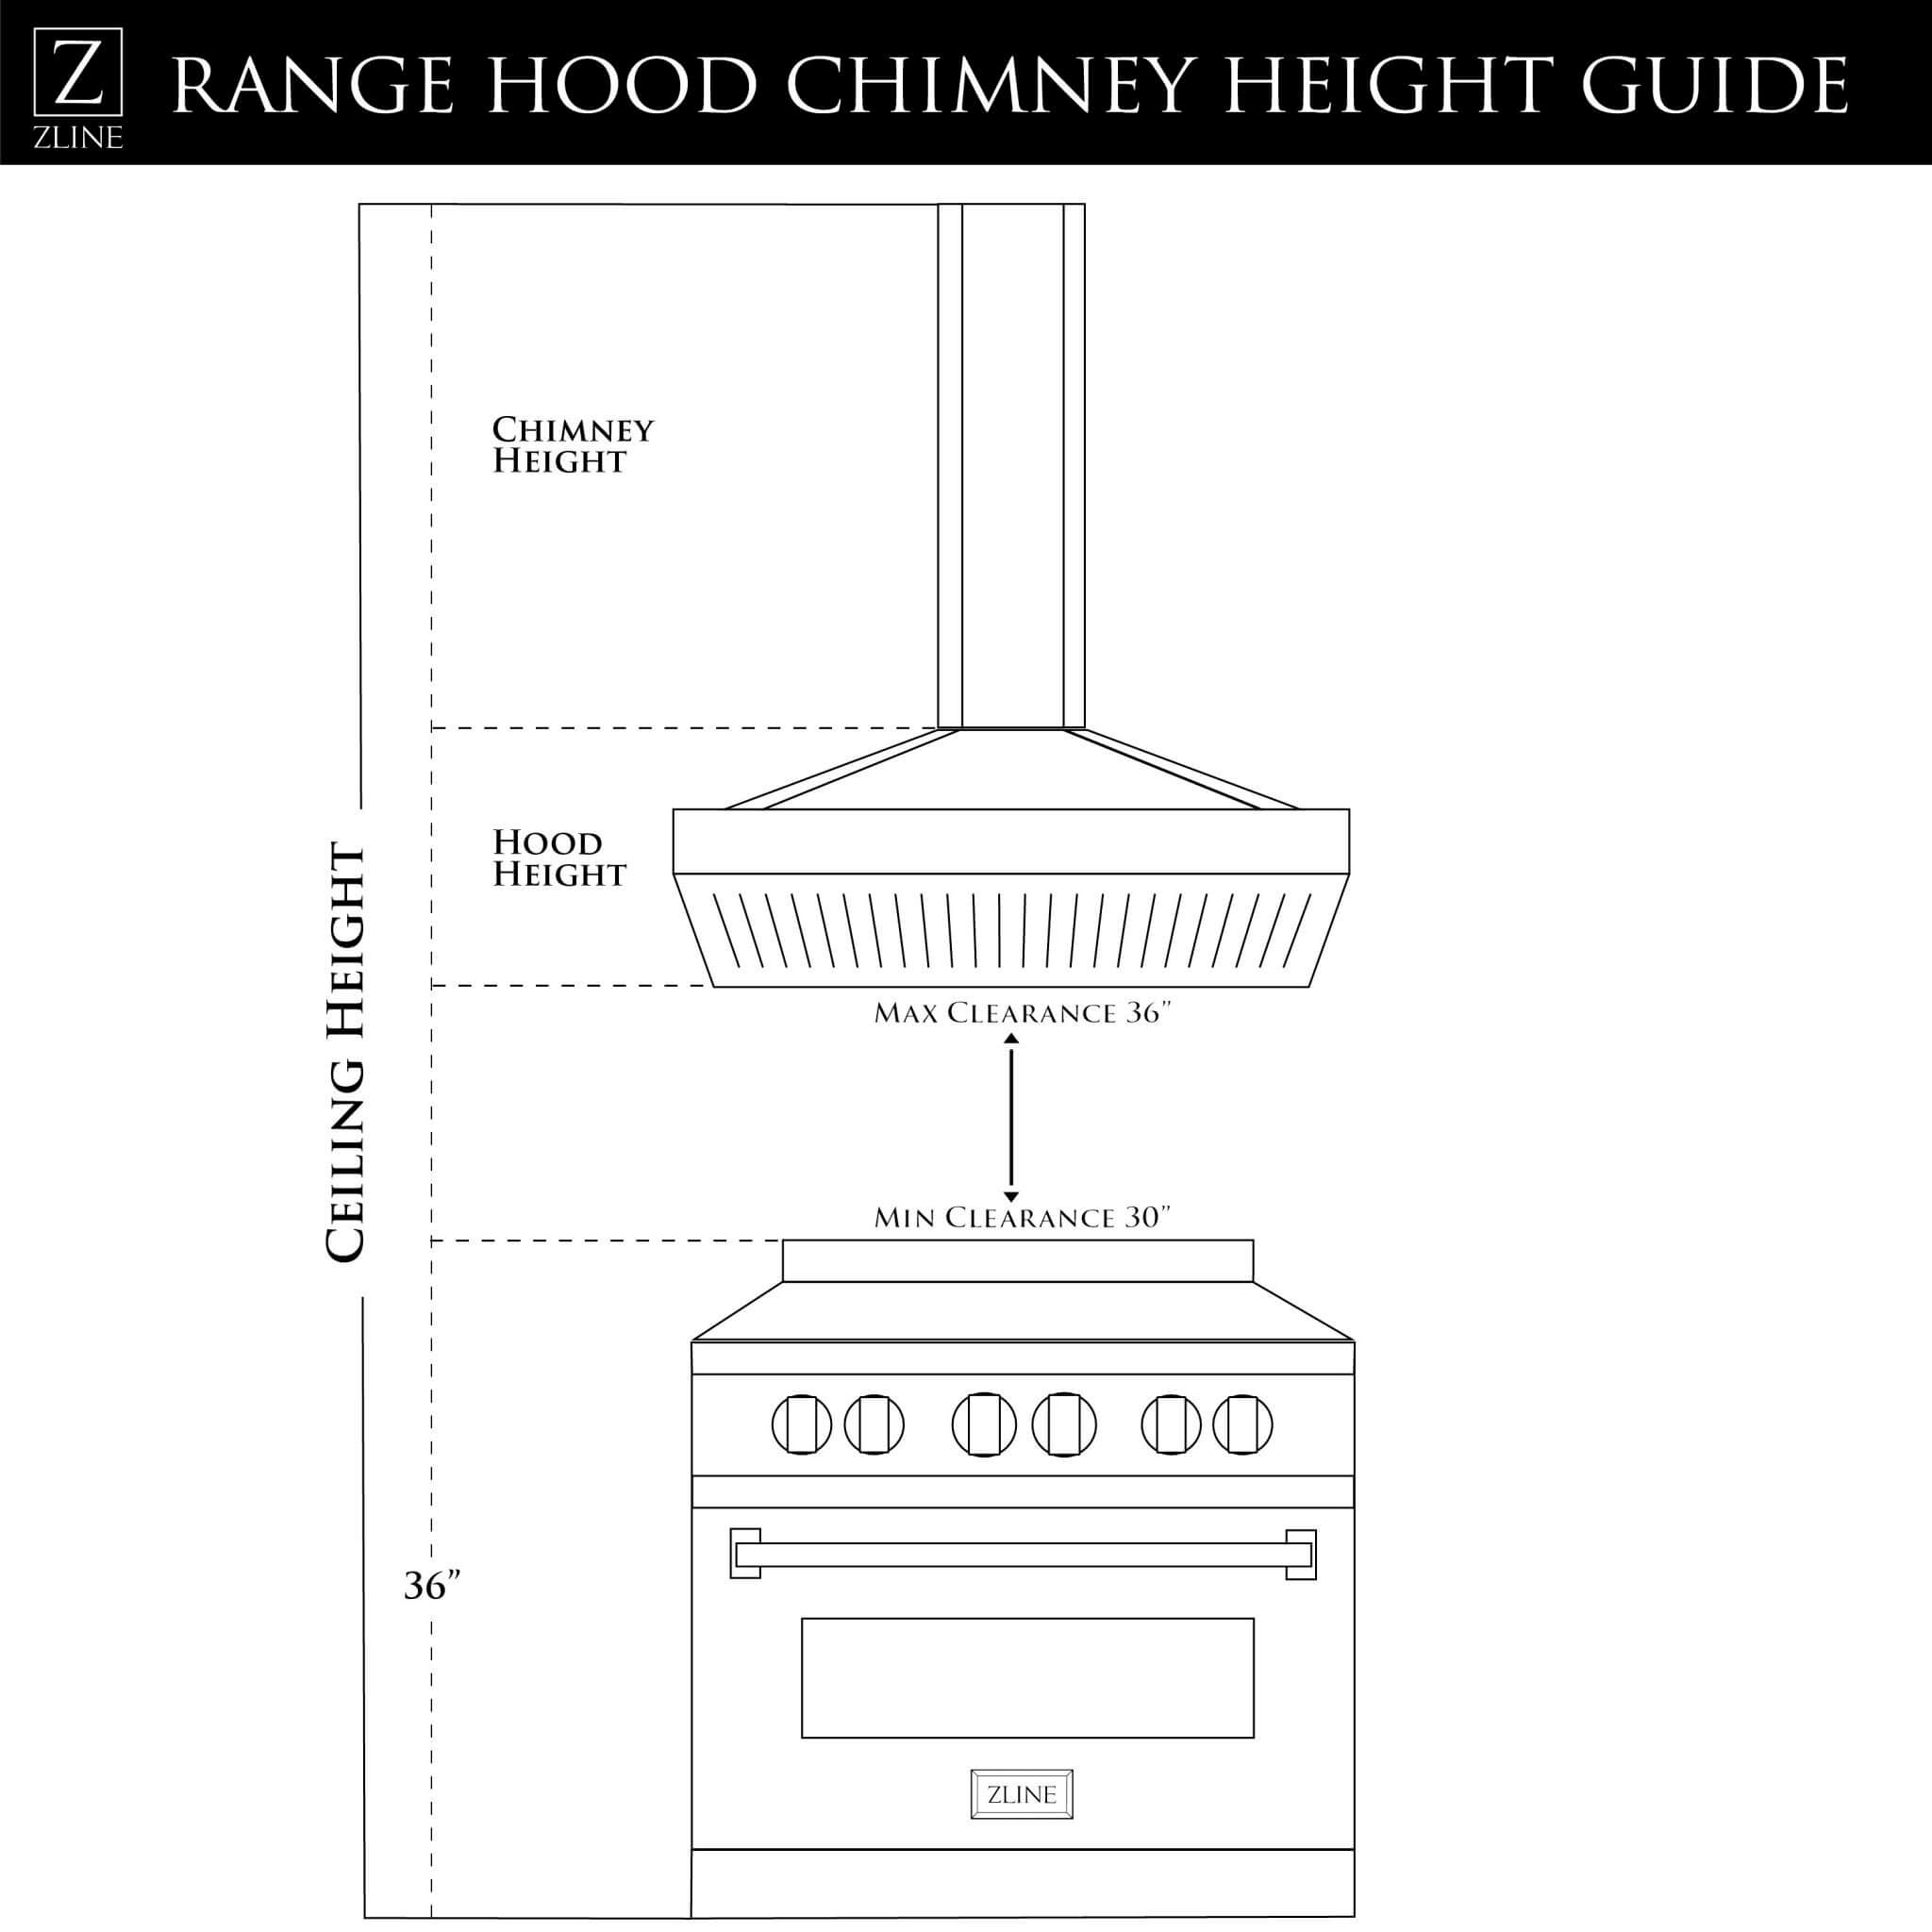 ZLINE Convertible Vent Wall Mount Range Hood in Stainless Steel & Glass (KN) chimney height guide.